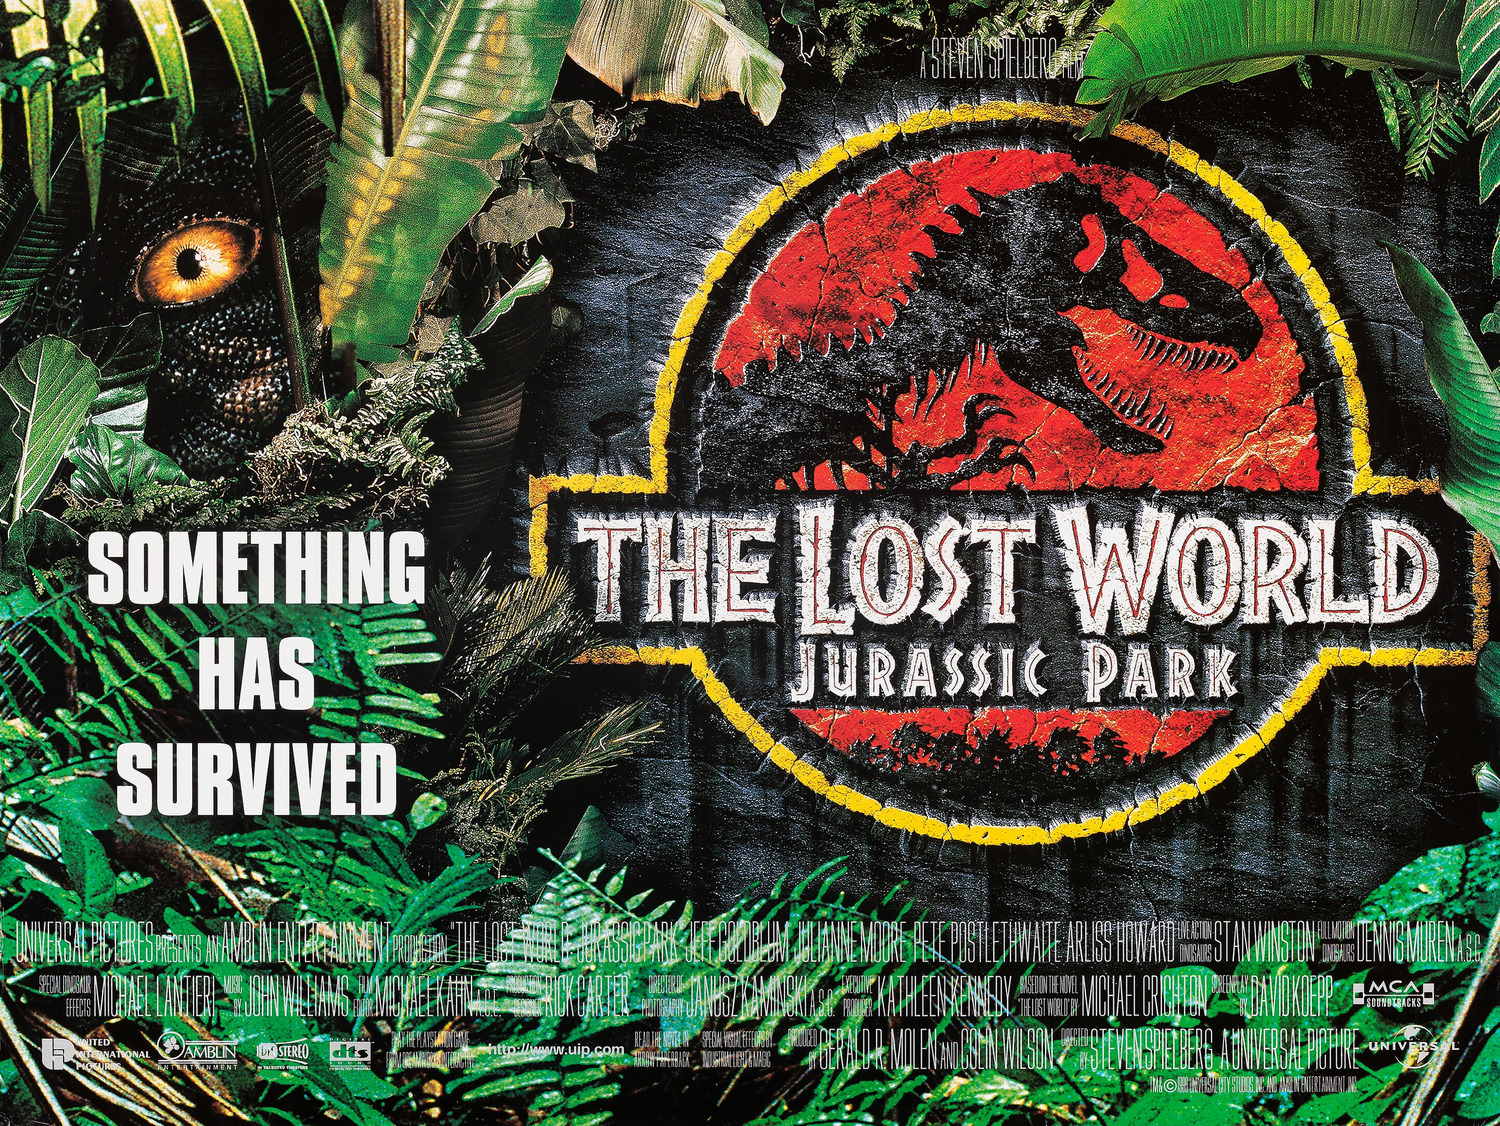 Extra Large Movie Poster Image for The Lost World: Jurassic Park (#3 of 3)